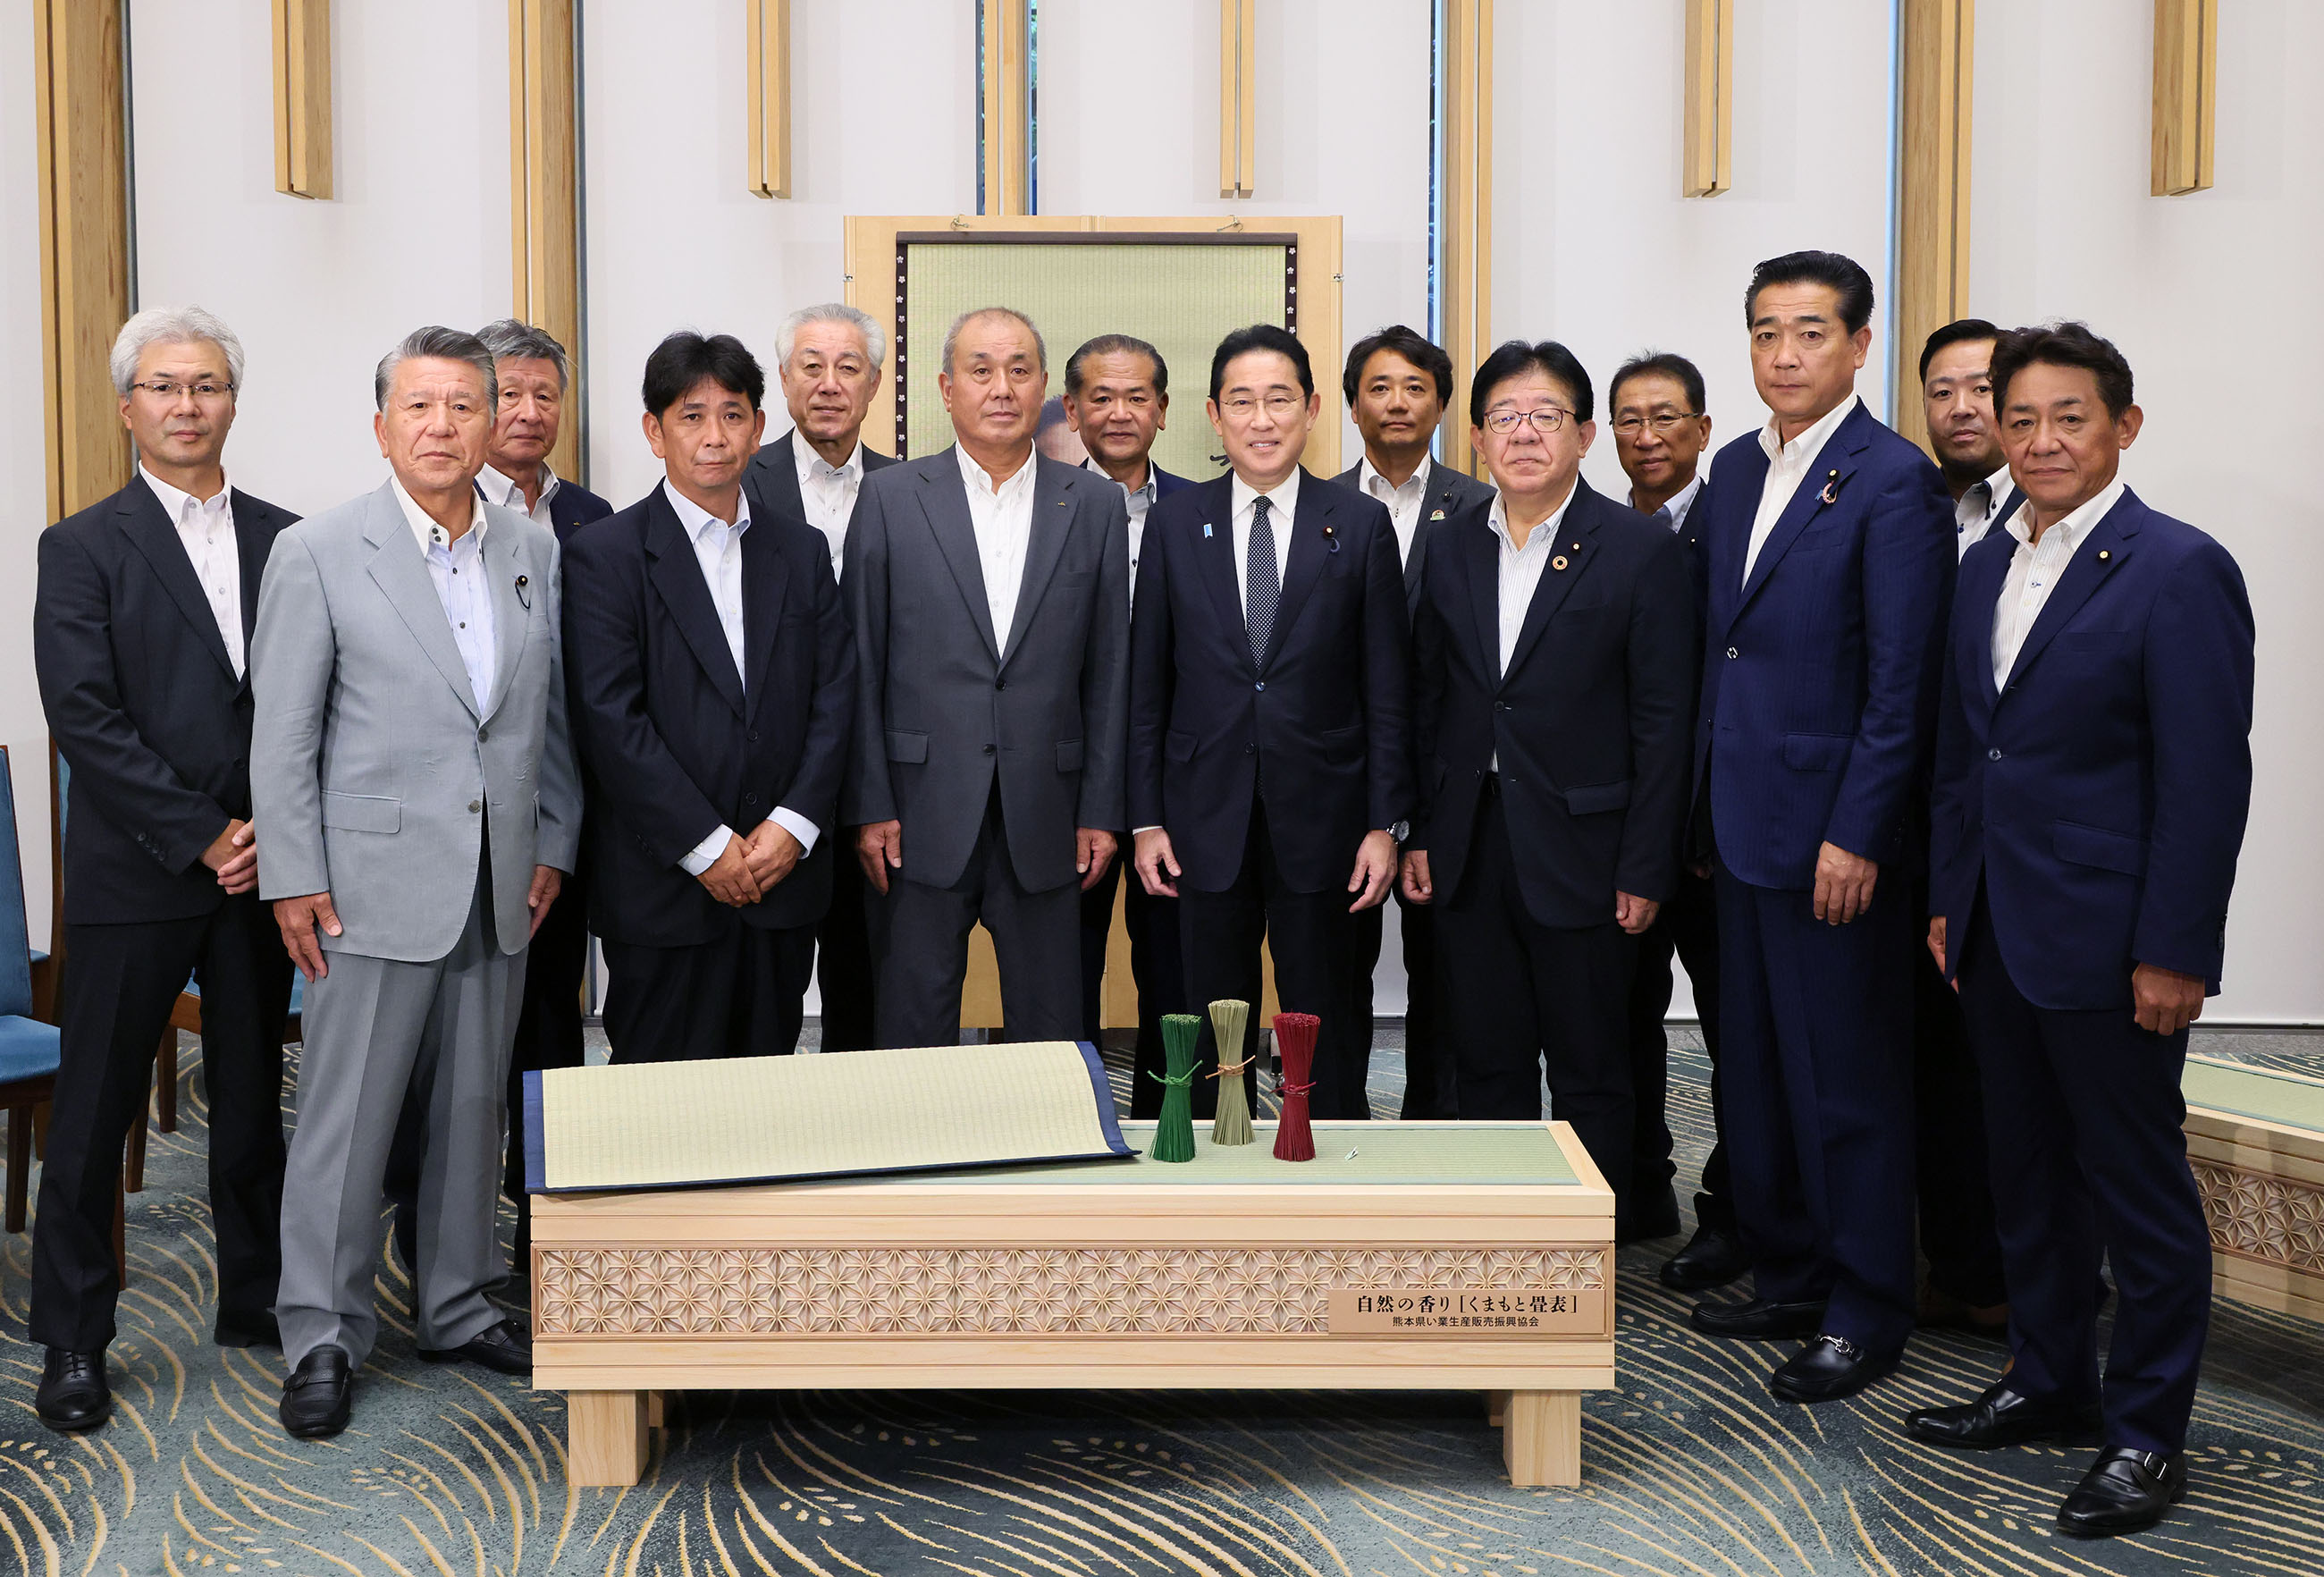 Presentation of Igusa Products by the Igusa Production and Sales Promotion Association of Kumamoto Prefecture and Others